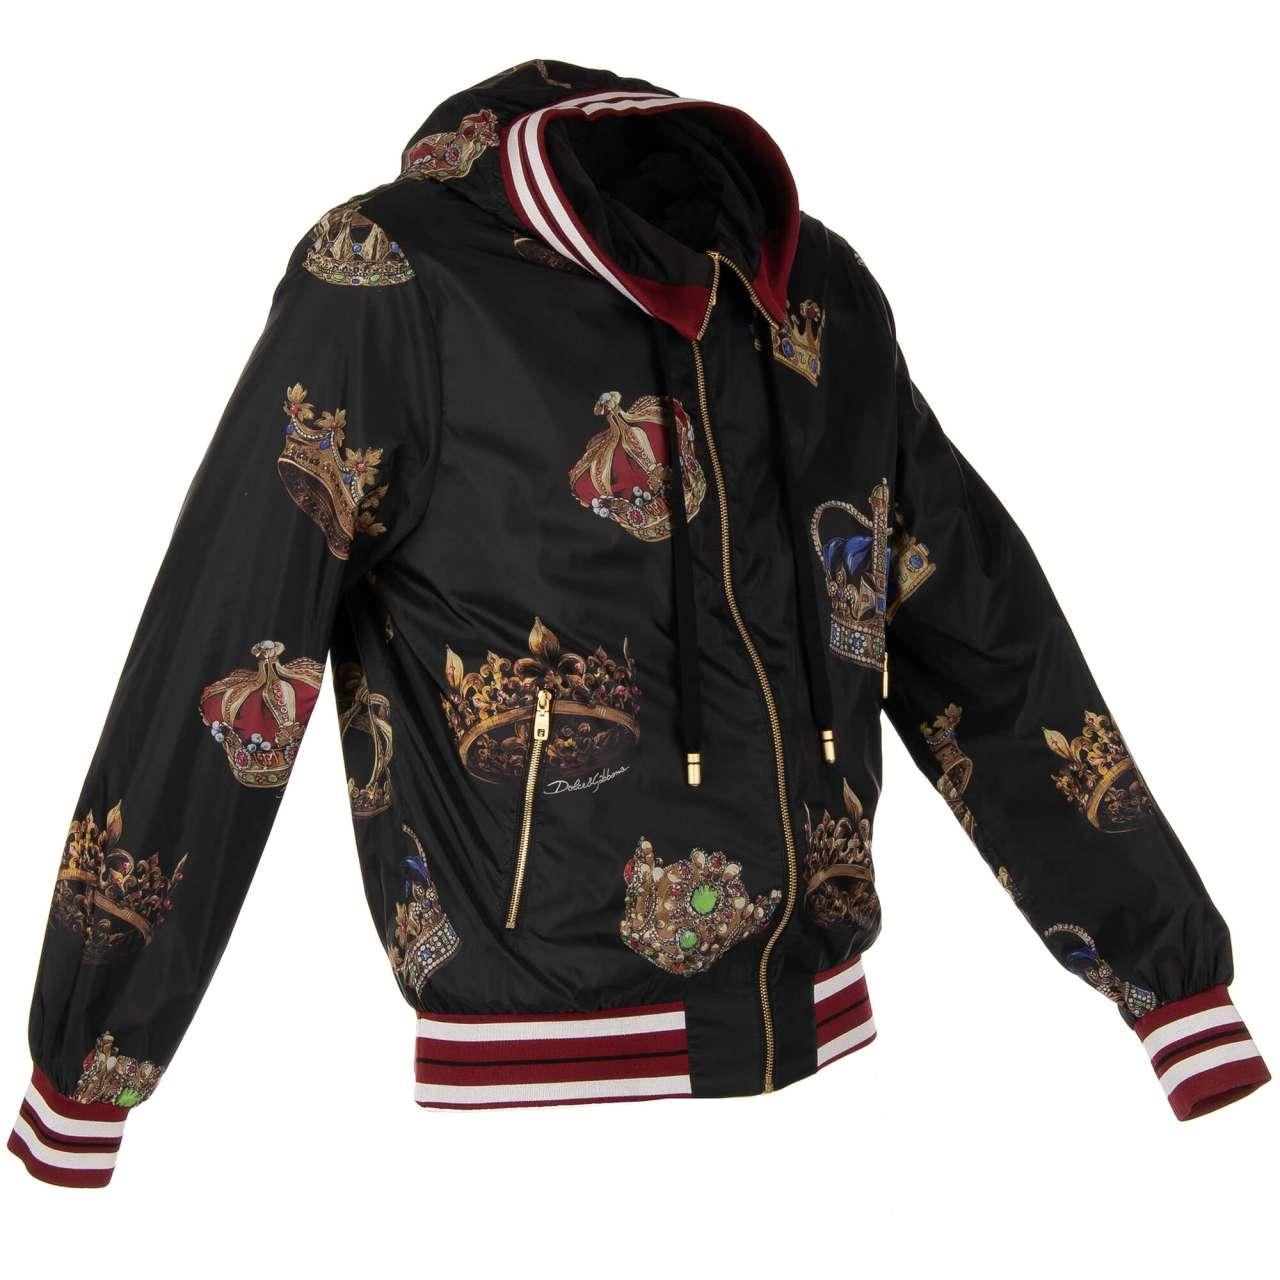 Dolce & Gabbana Crown Printed Bomber Jacket with Hoody and Pockets Black 48 M In Excellent Condition For Sale In Erkrath, DE